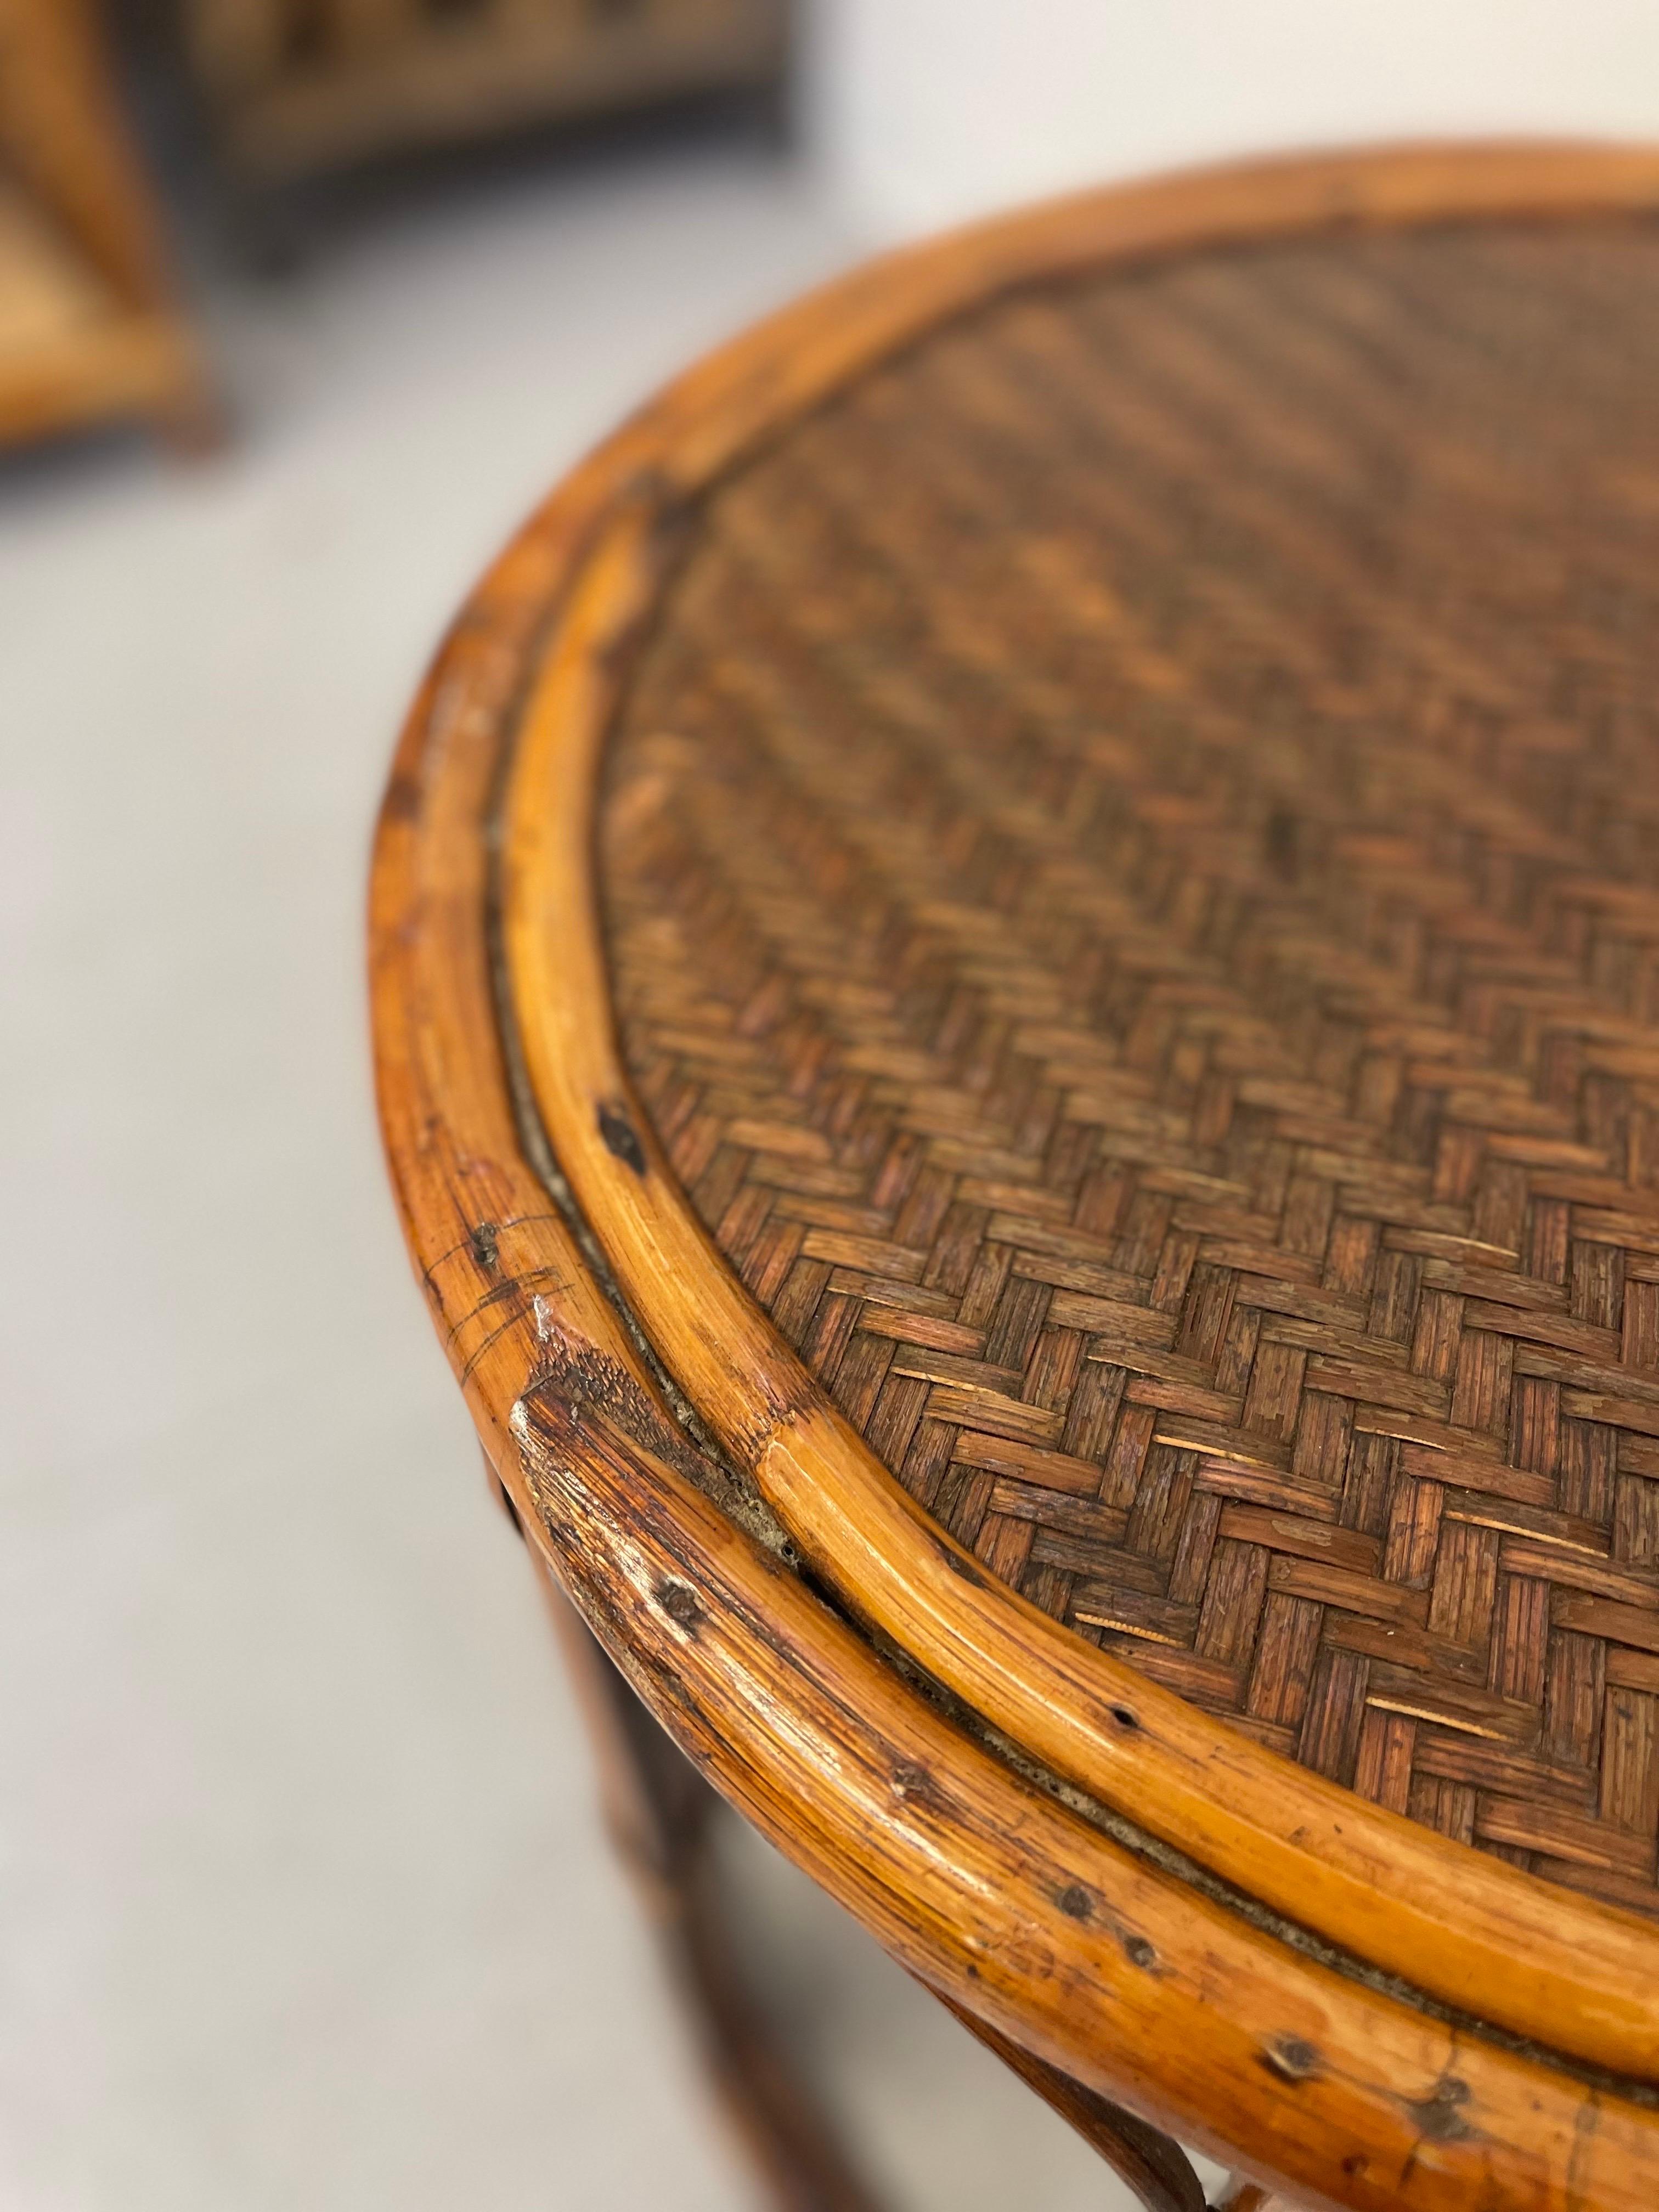 Woven top side table with caning on the base. Possibly bamboo or bent wood. Round shape.
Vintage condition consistent with age as pictured.